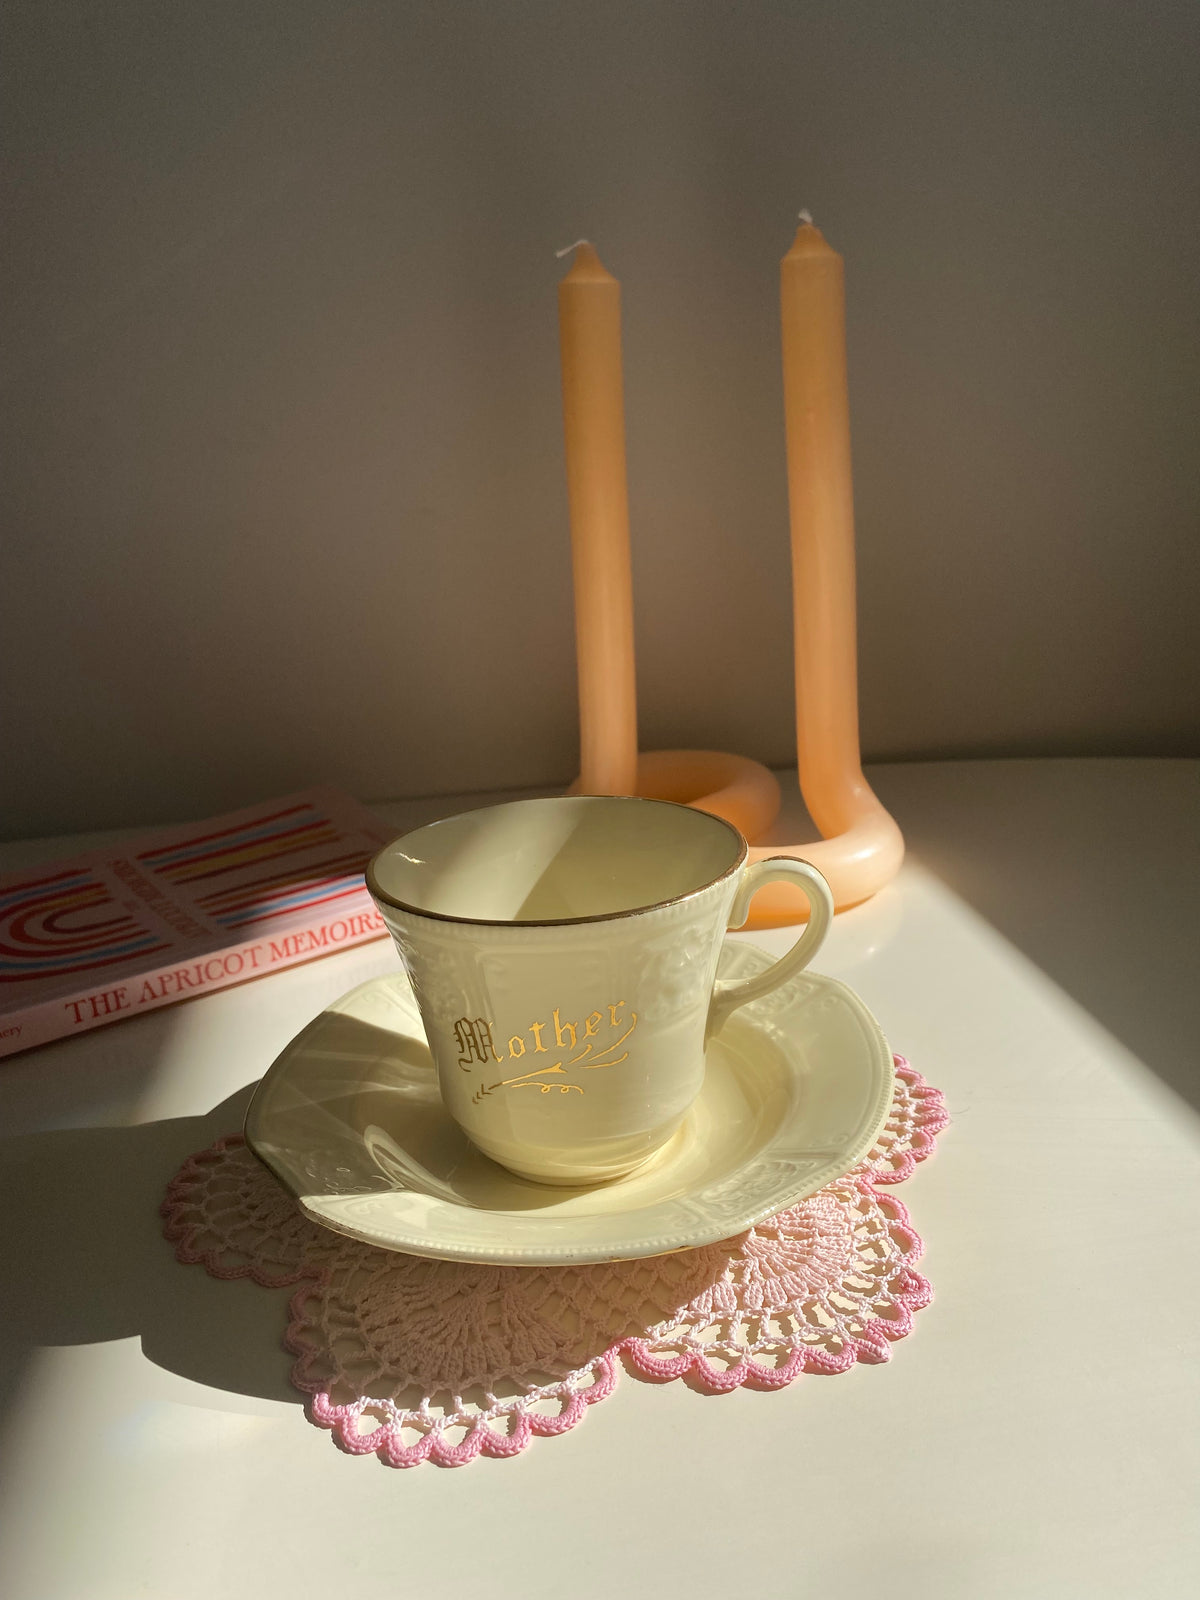 Blessed Mom Tea Cup & Saucer